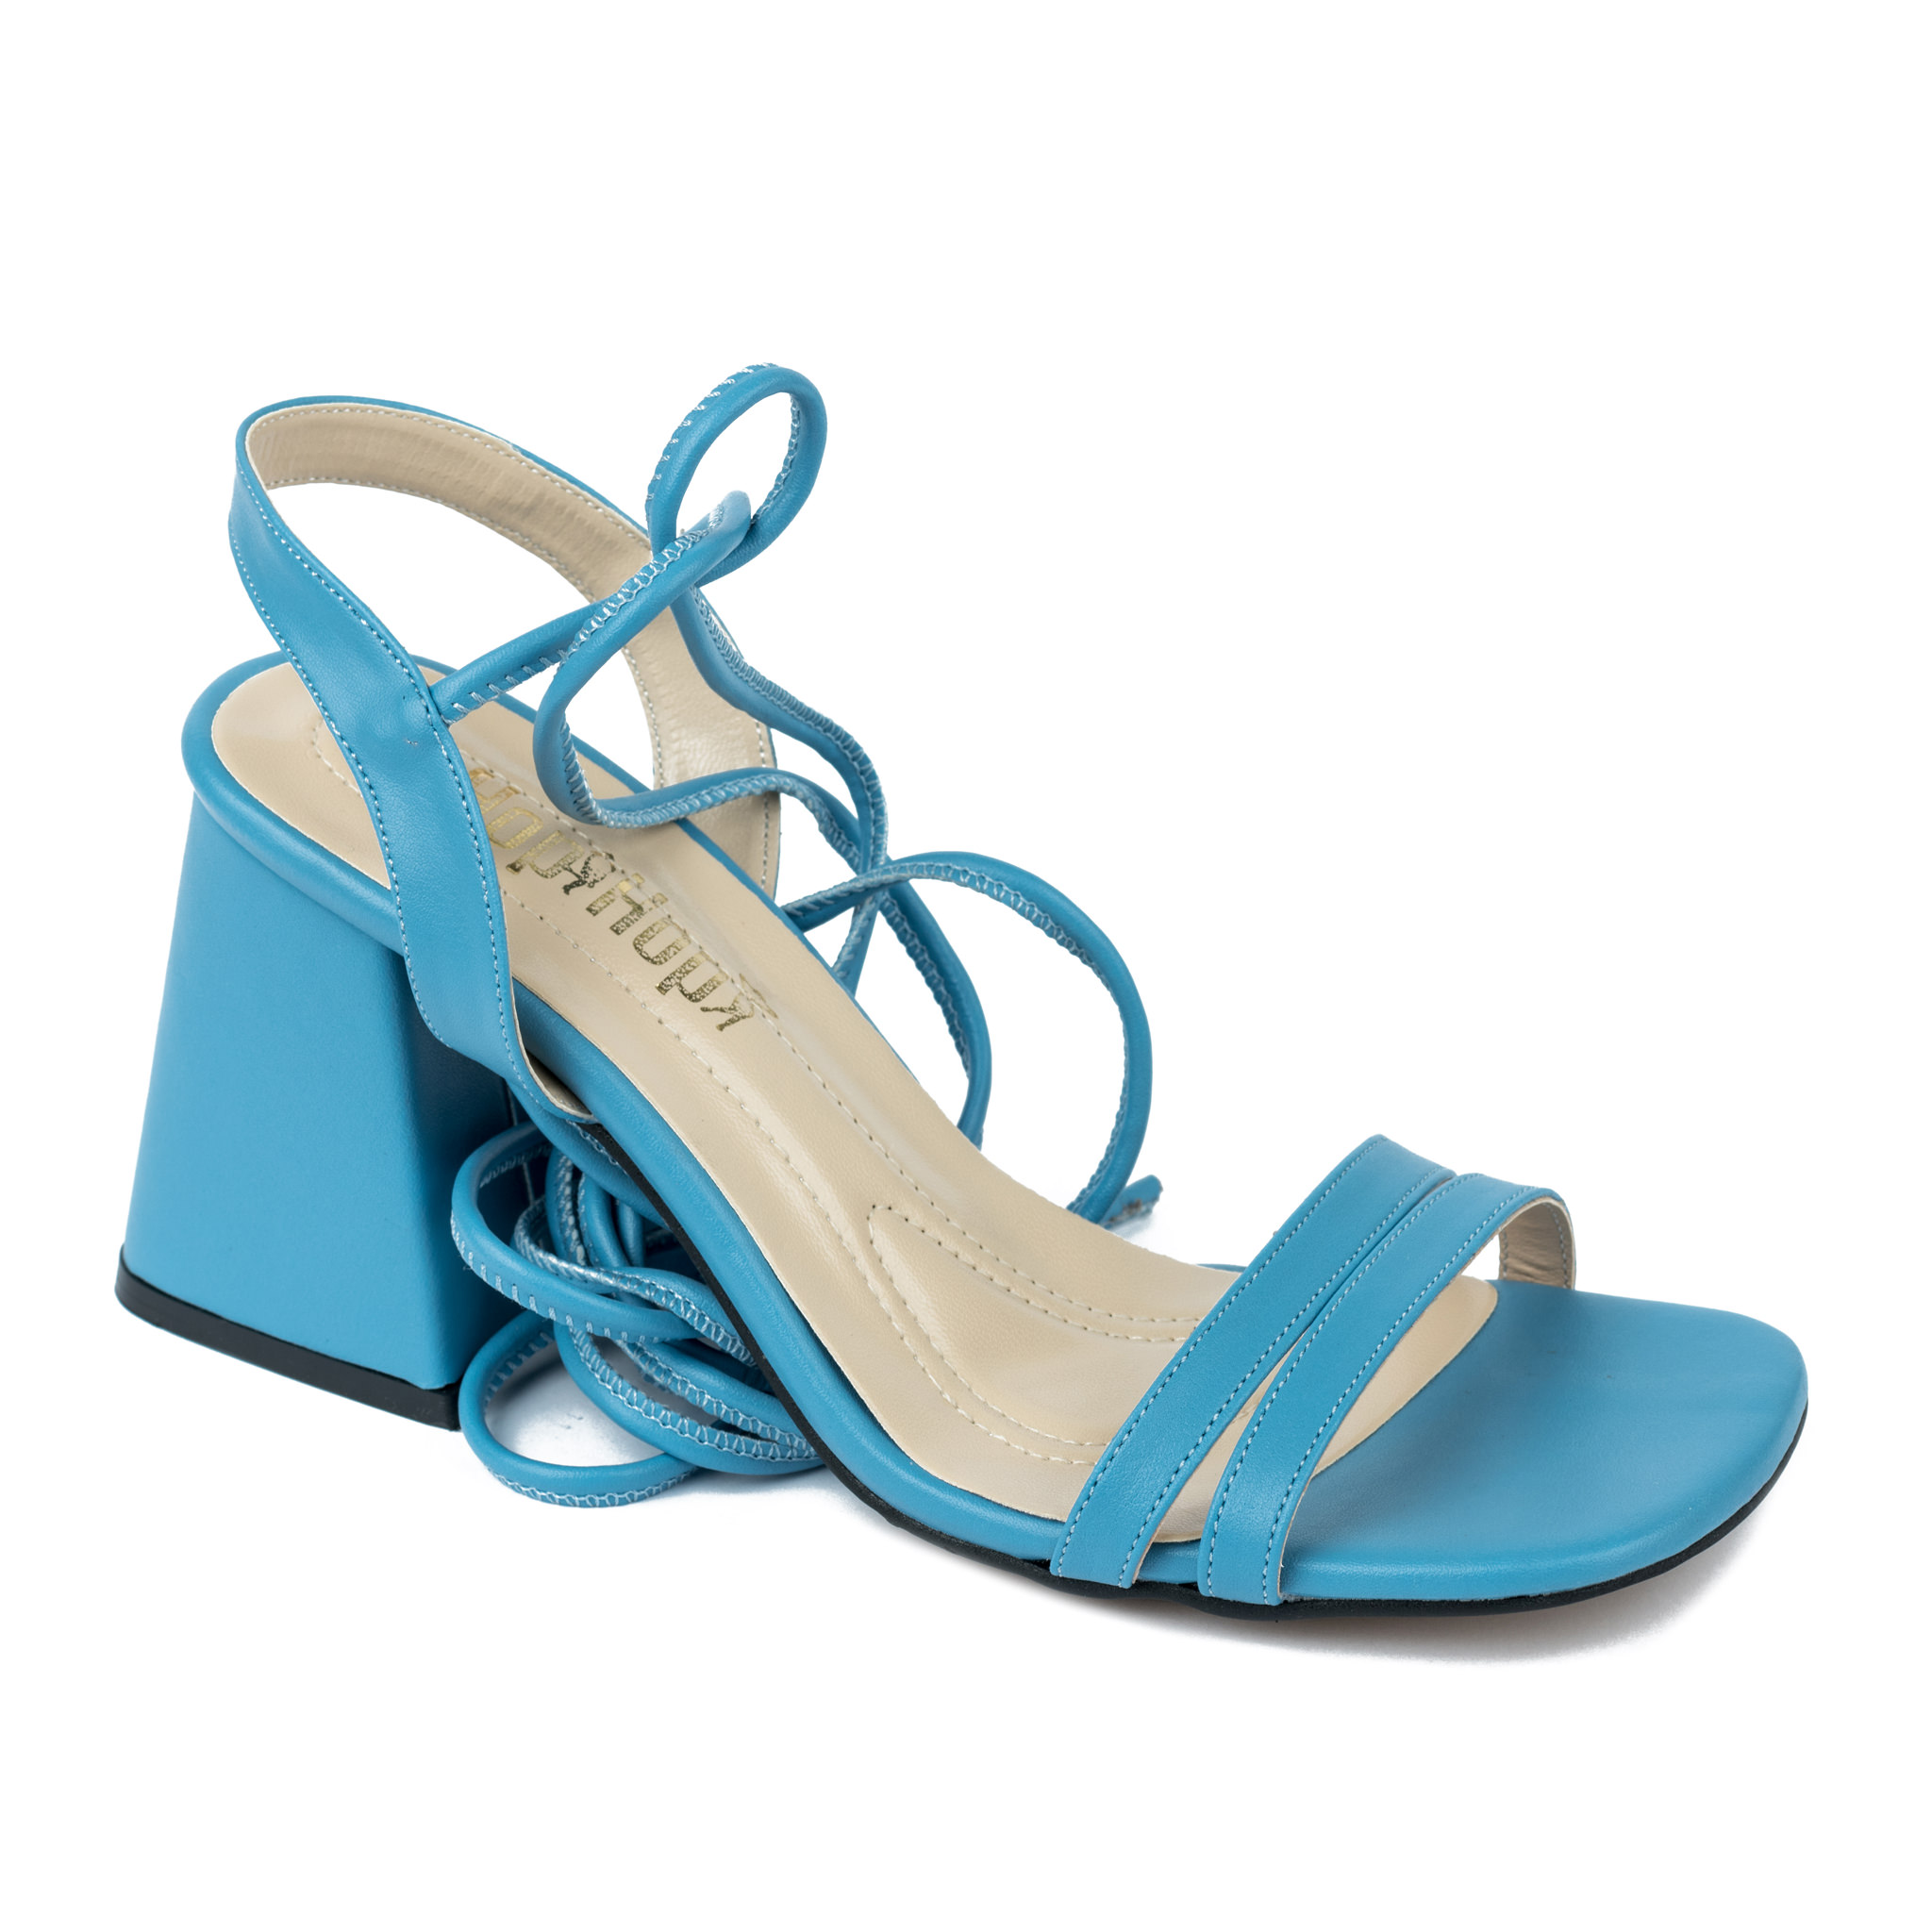 LACE UP SANDALS WITH THICK HEEL - BLUE